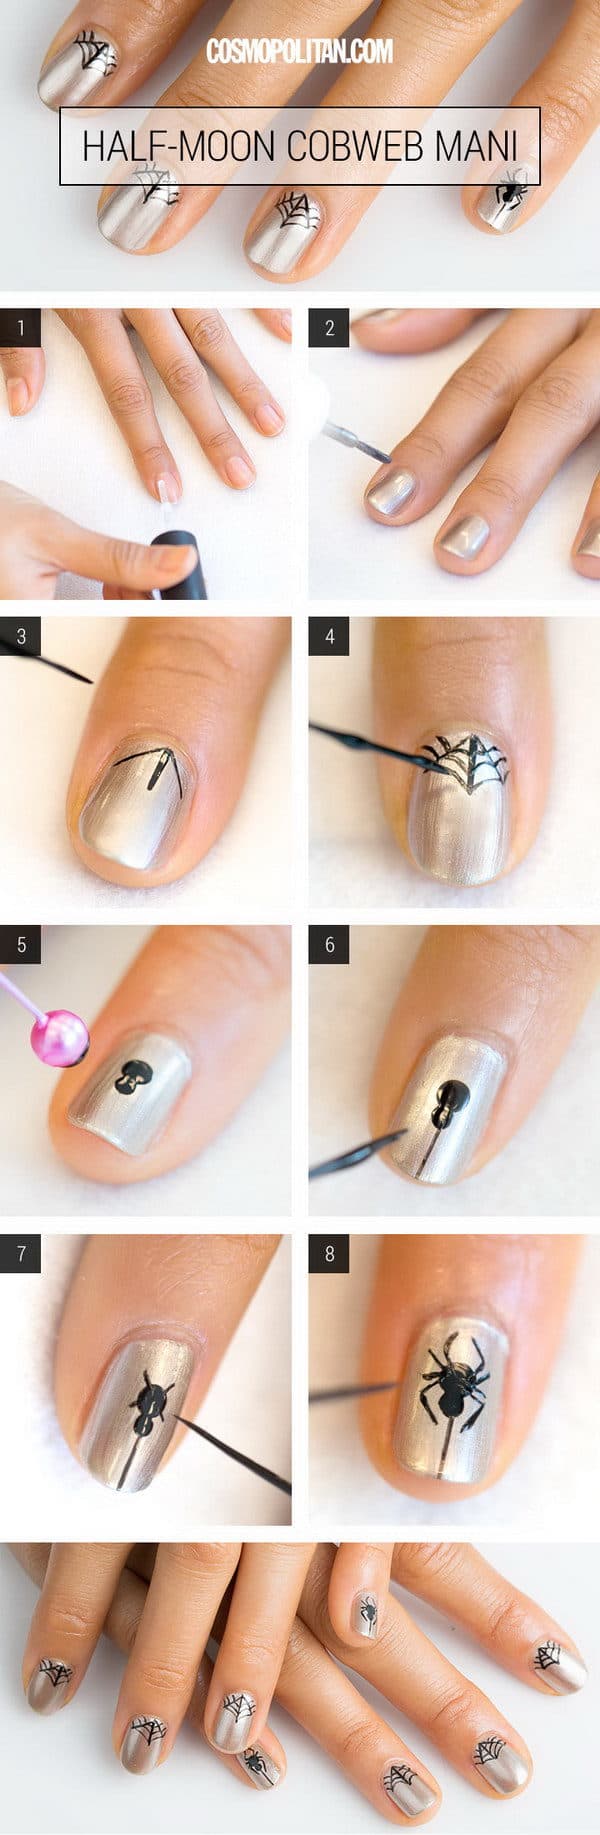 Scary Halloween Manicure Tutorials That Will Catch Your Eye